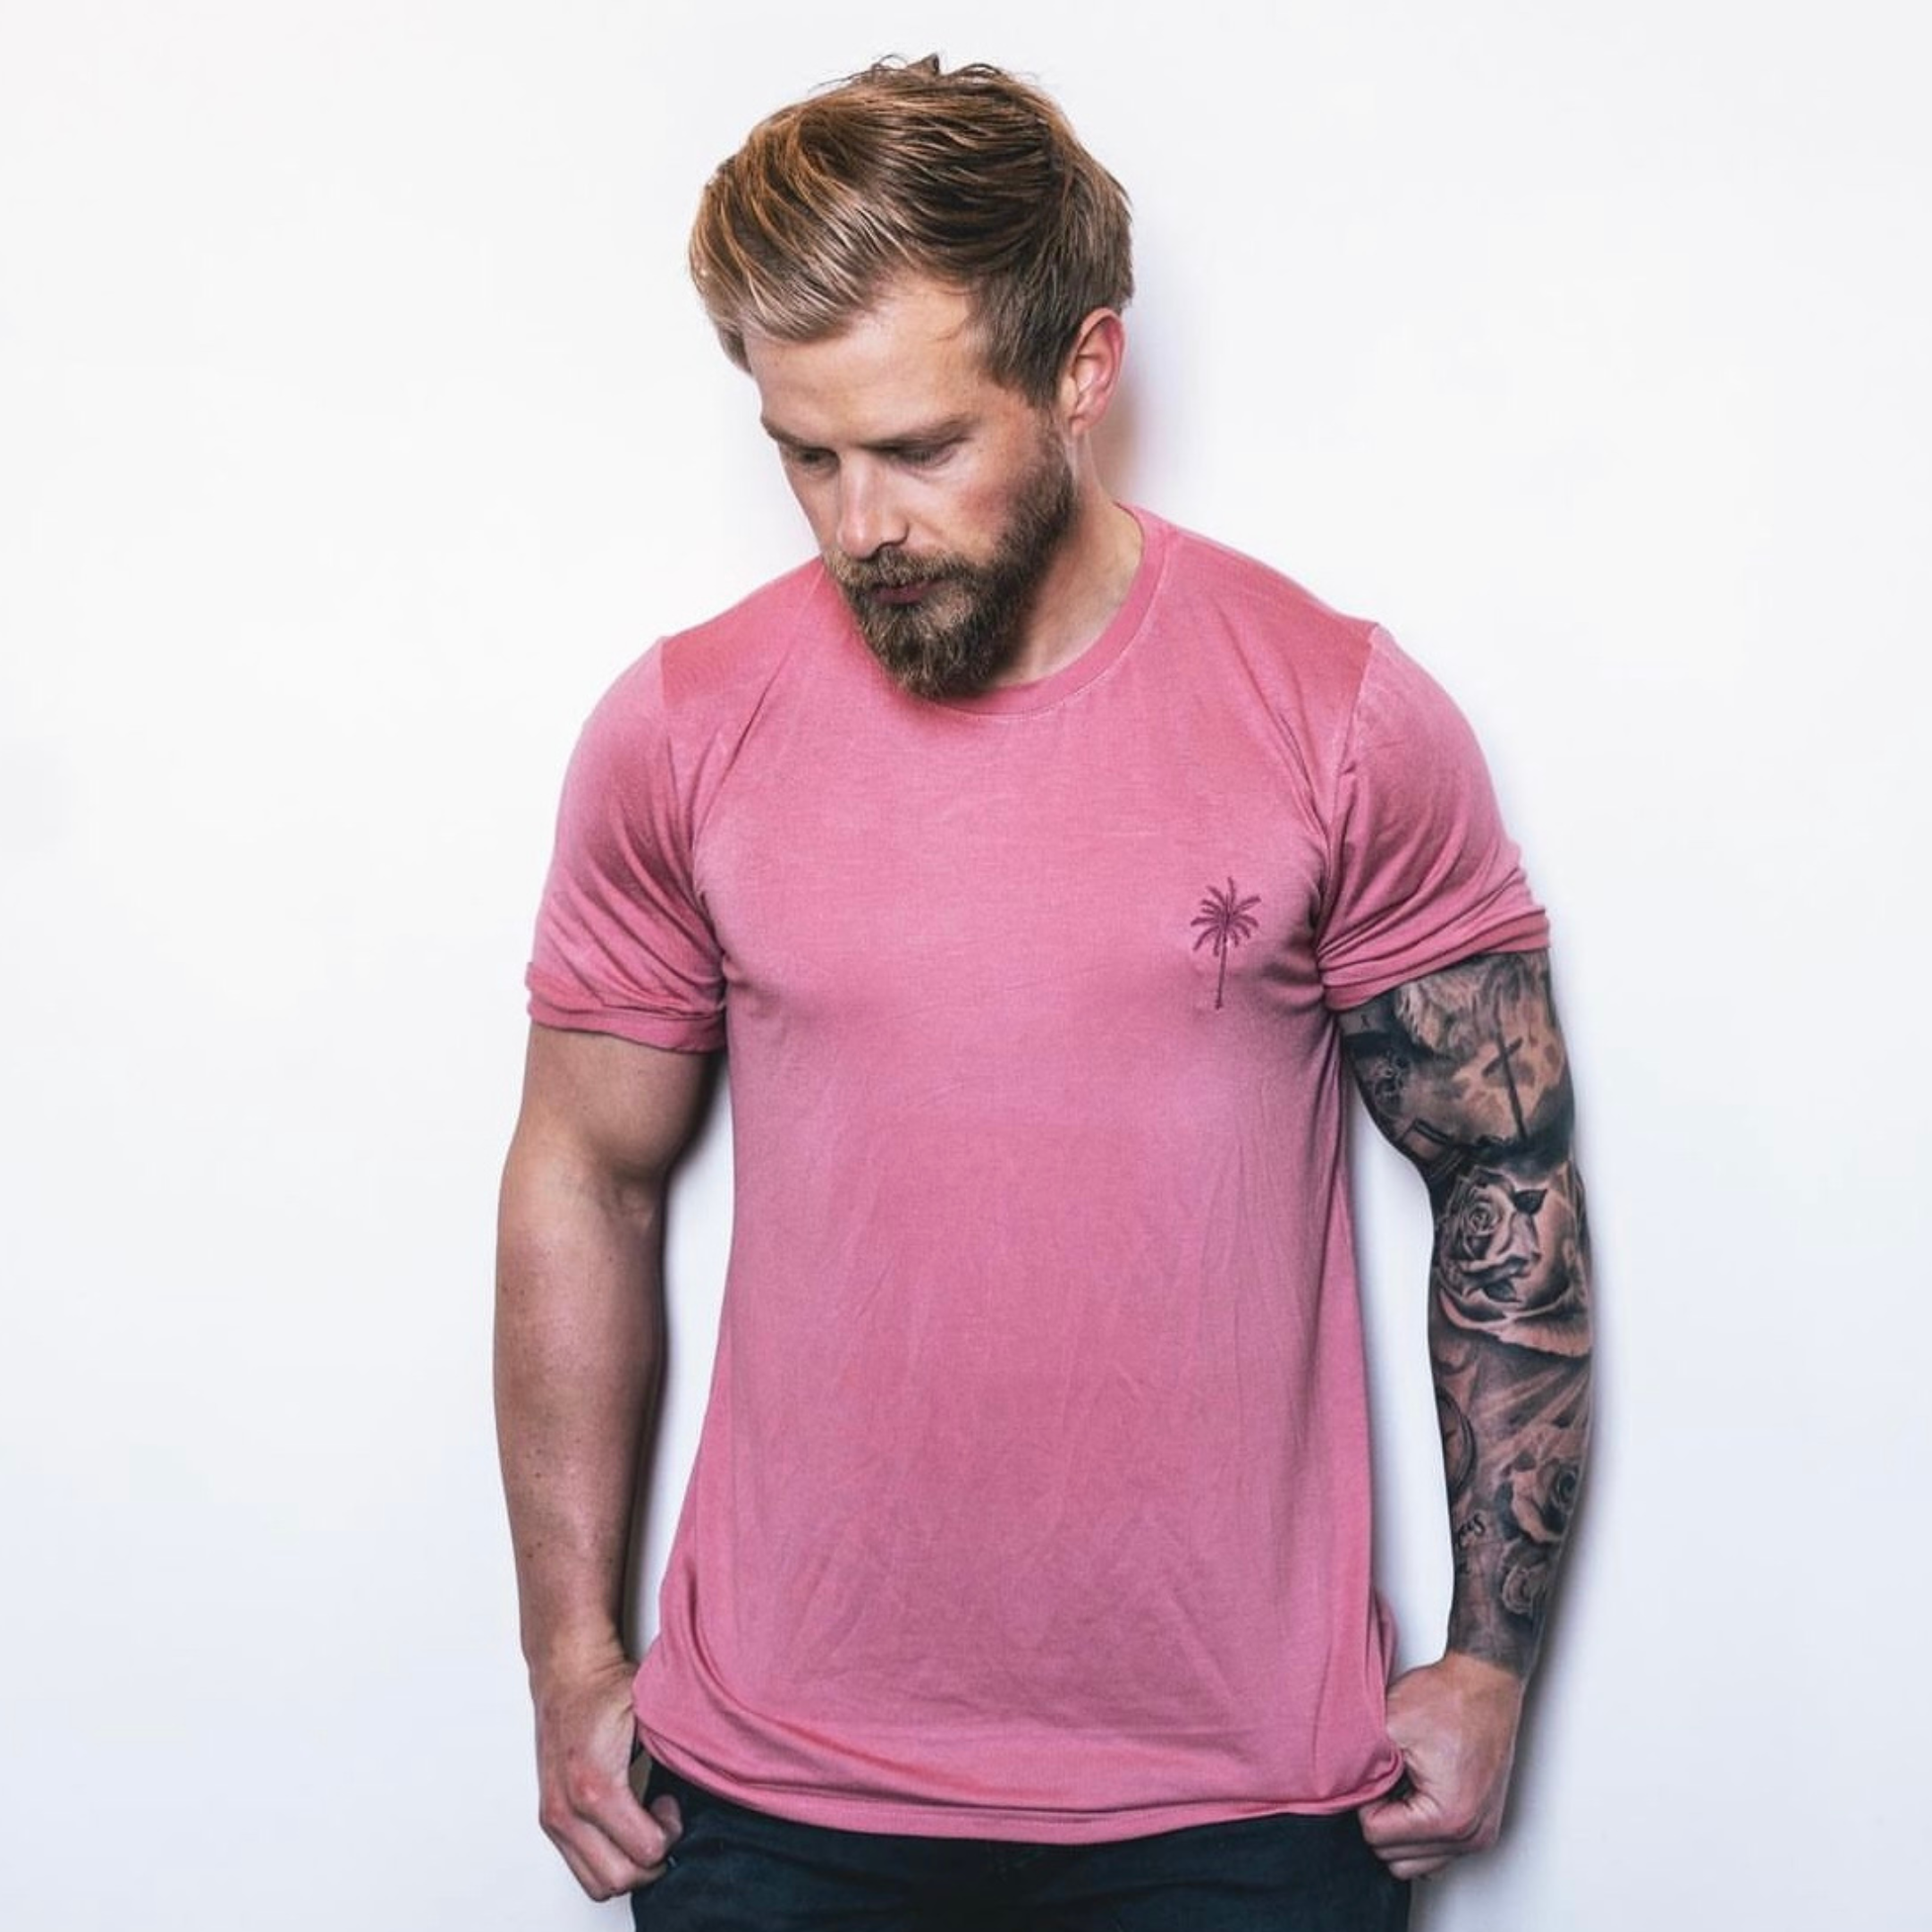 Rolled Muscle Tee - WatermelonStrange ParadiseStrange Paradise
Our Rolled Muscle Tees are designed for everyday wear. Our fabric delivers a product for those with a demanding and versatile lifestyle. From the workplace or gym, Rolled Muscle Tee - Watermelon